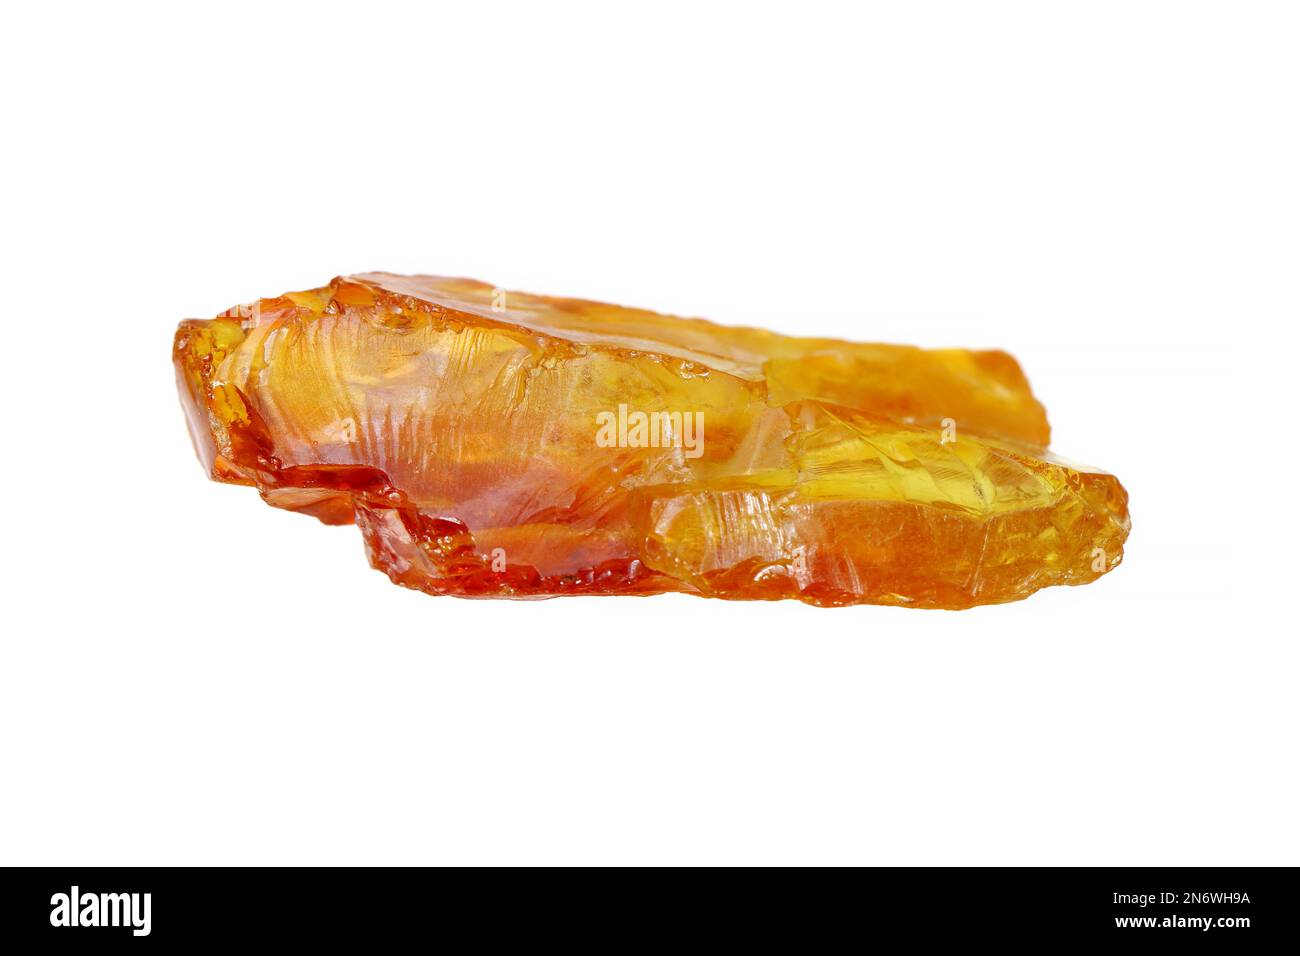 Closeup natural rough uncut amber stone on white background. Amber is a fossilized tree resin. Stock Photo